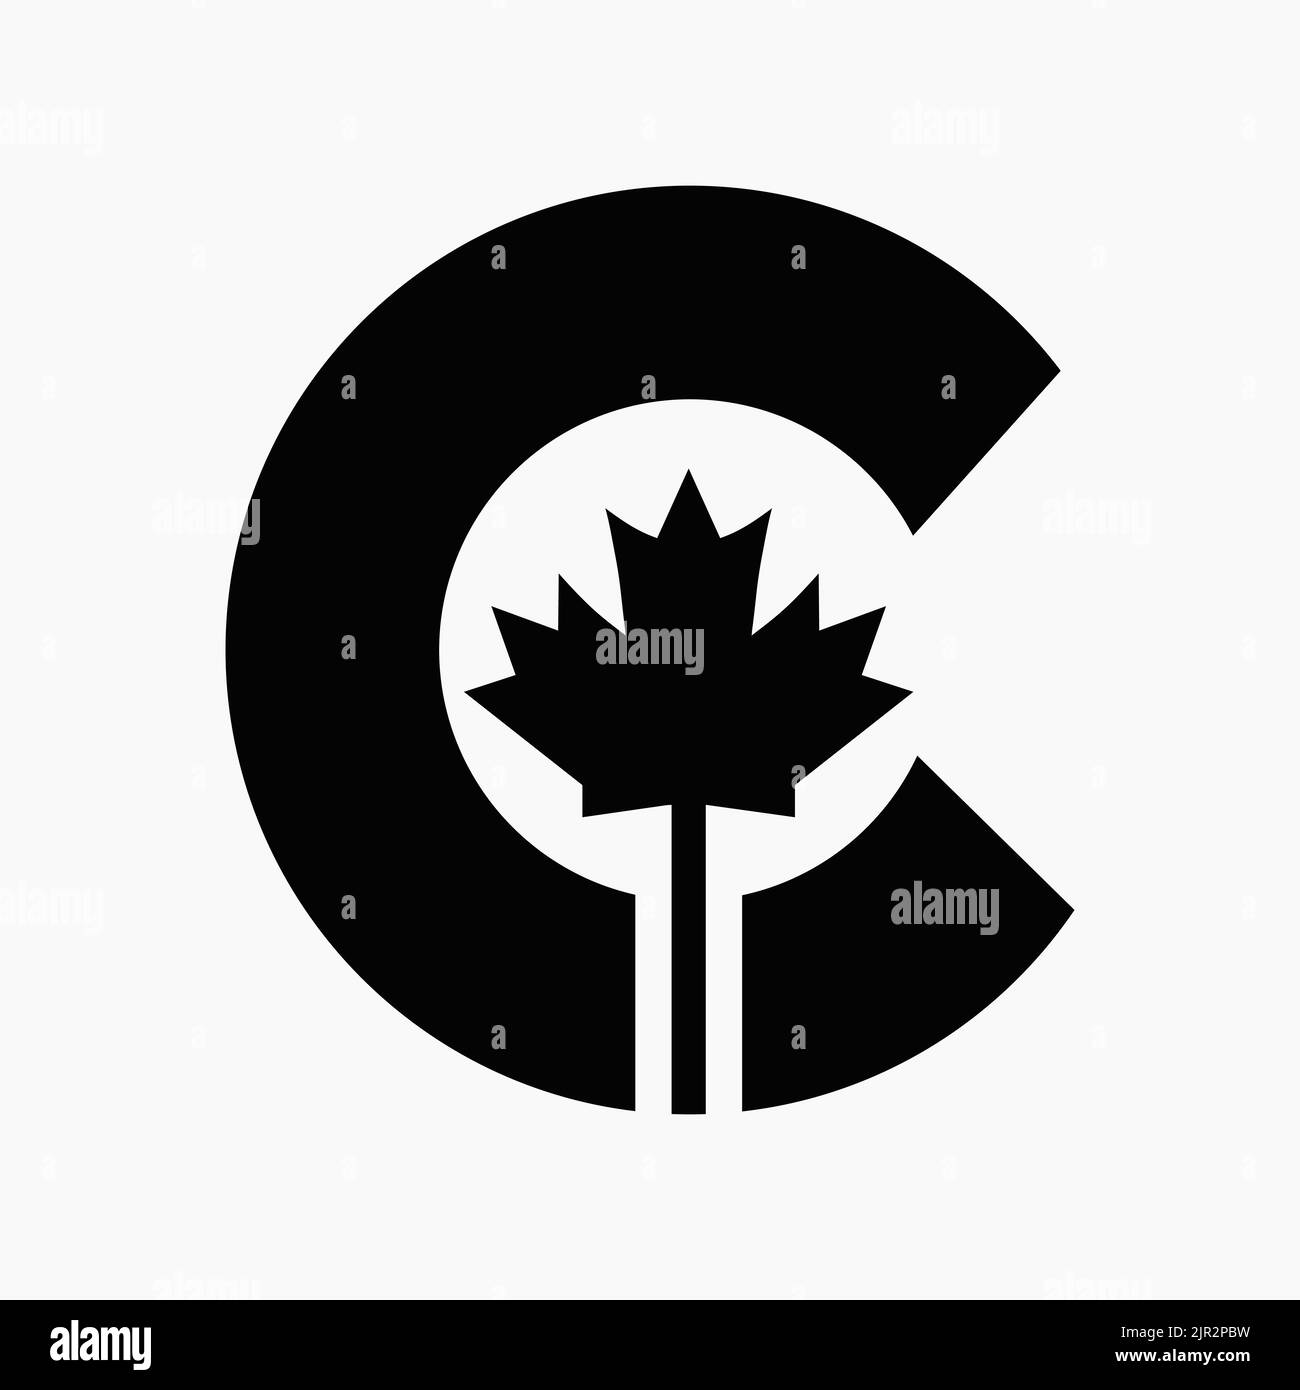 Canadian Red Maple Logo on Letter C Vector Symbol. Maple Leaf Concept For Canadian Company Identity Stock Vector